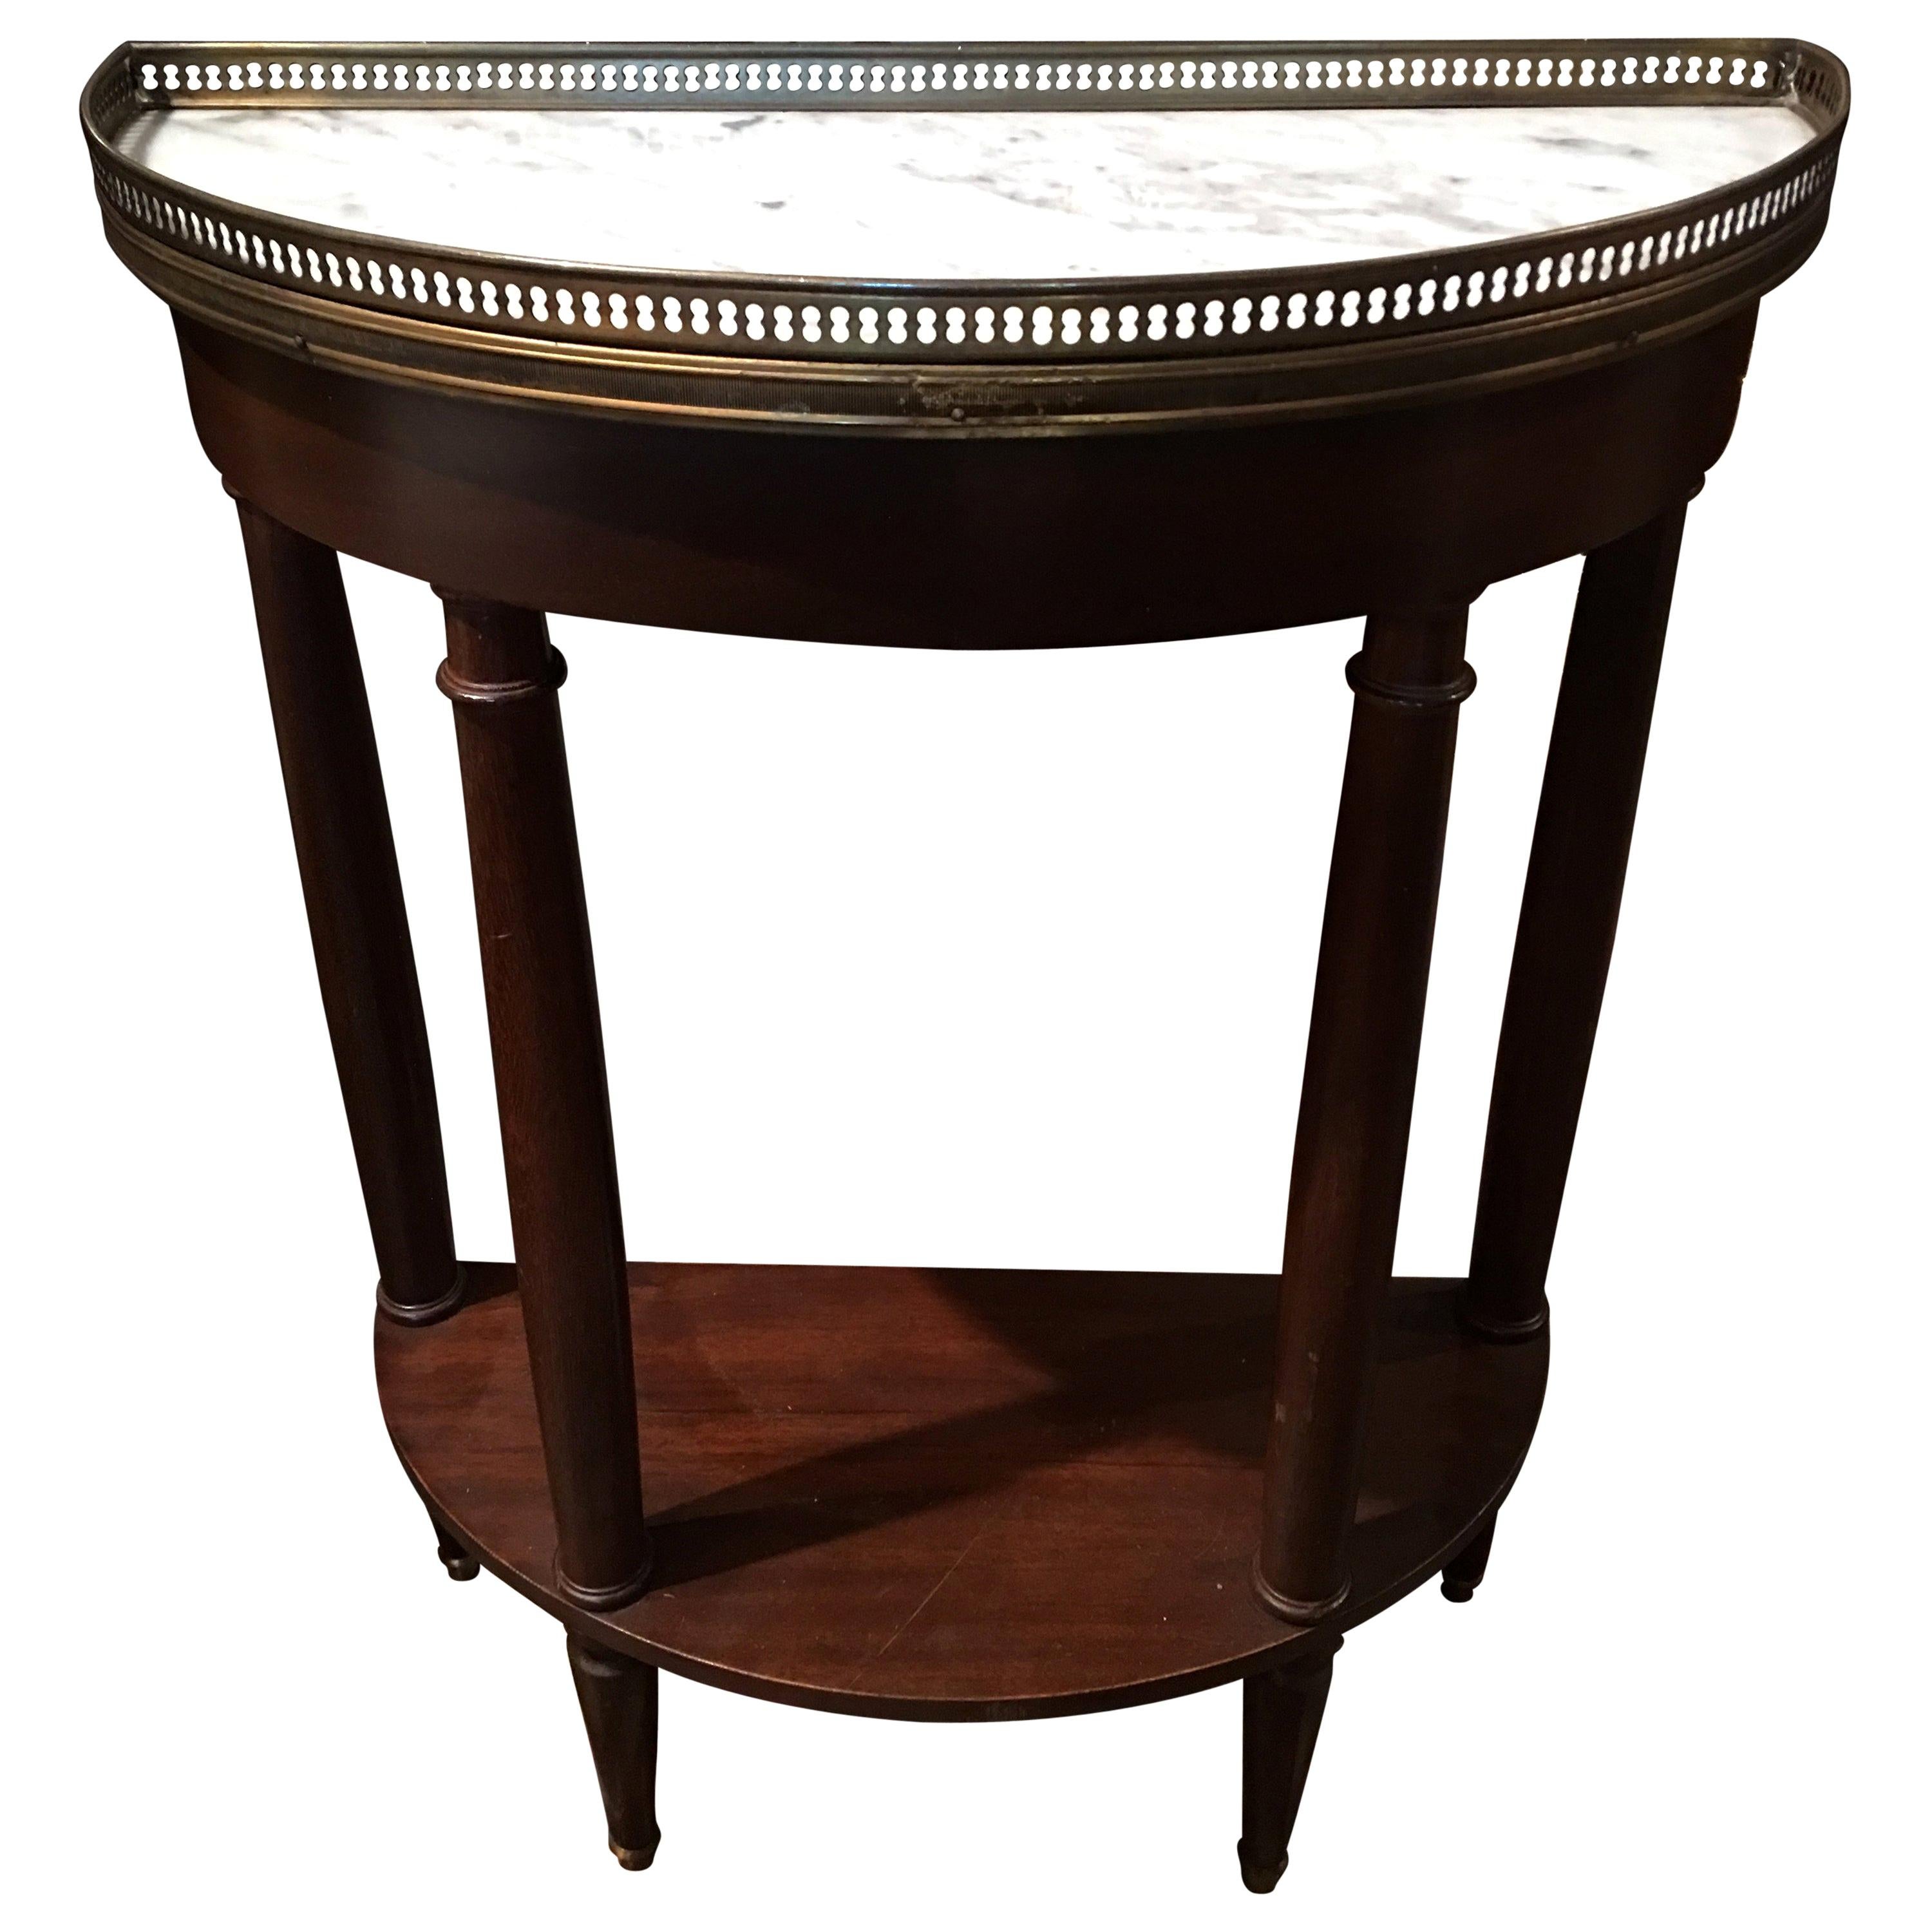 French Demilune or Console Table with a Marble Top, 19th Century